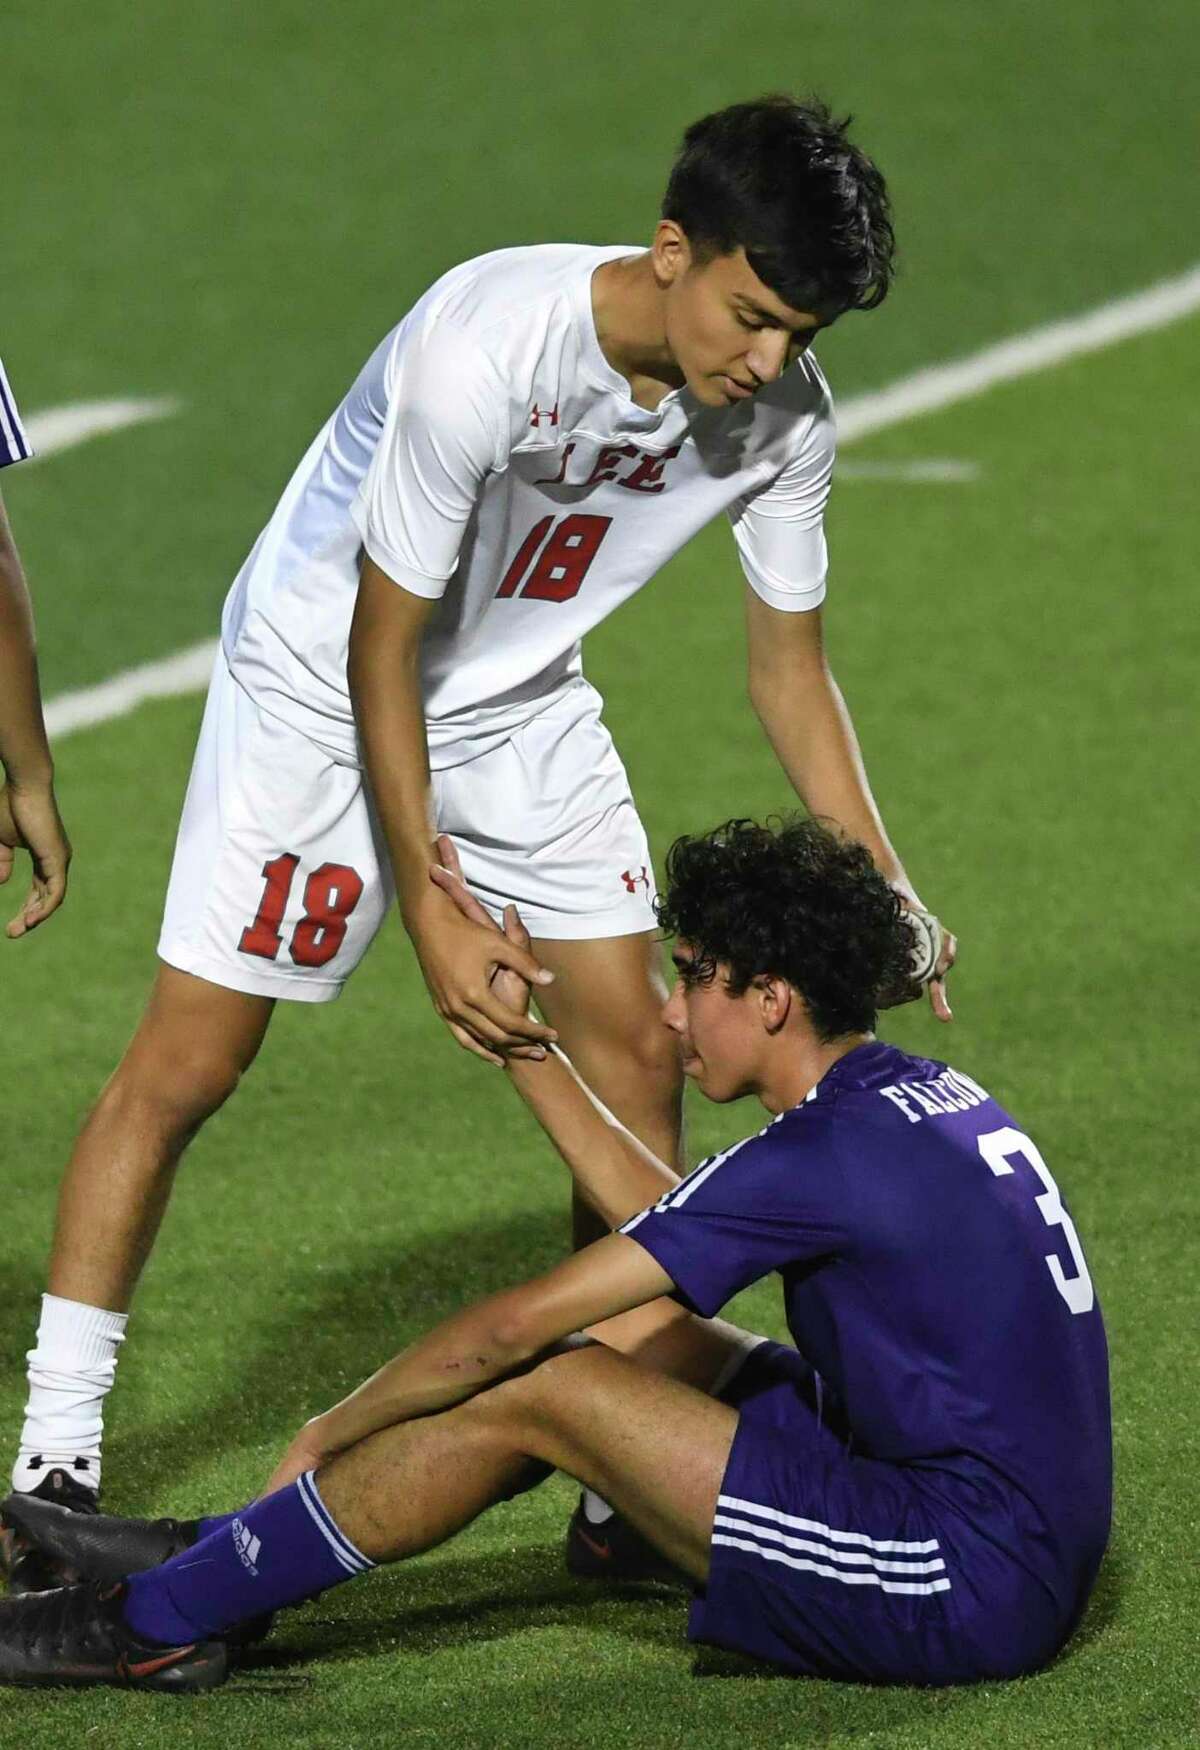 Alldair Ellias of LEE comforts Jose Bejarano of Jersey Village after LEE's 2-0 victory in the Class 6A state semifinal in Georgetown on Tuesday, April 13, 2021.